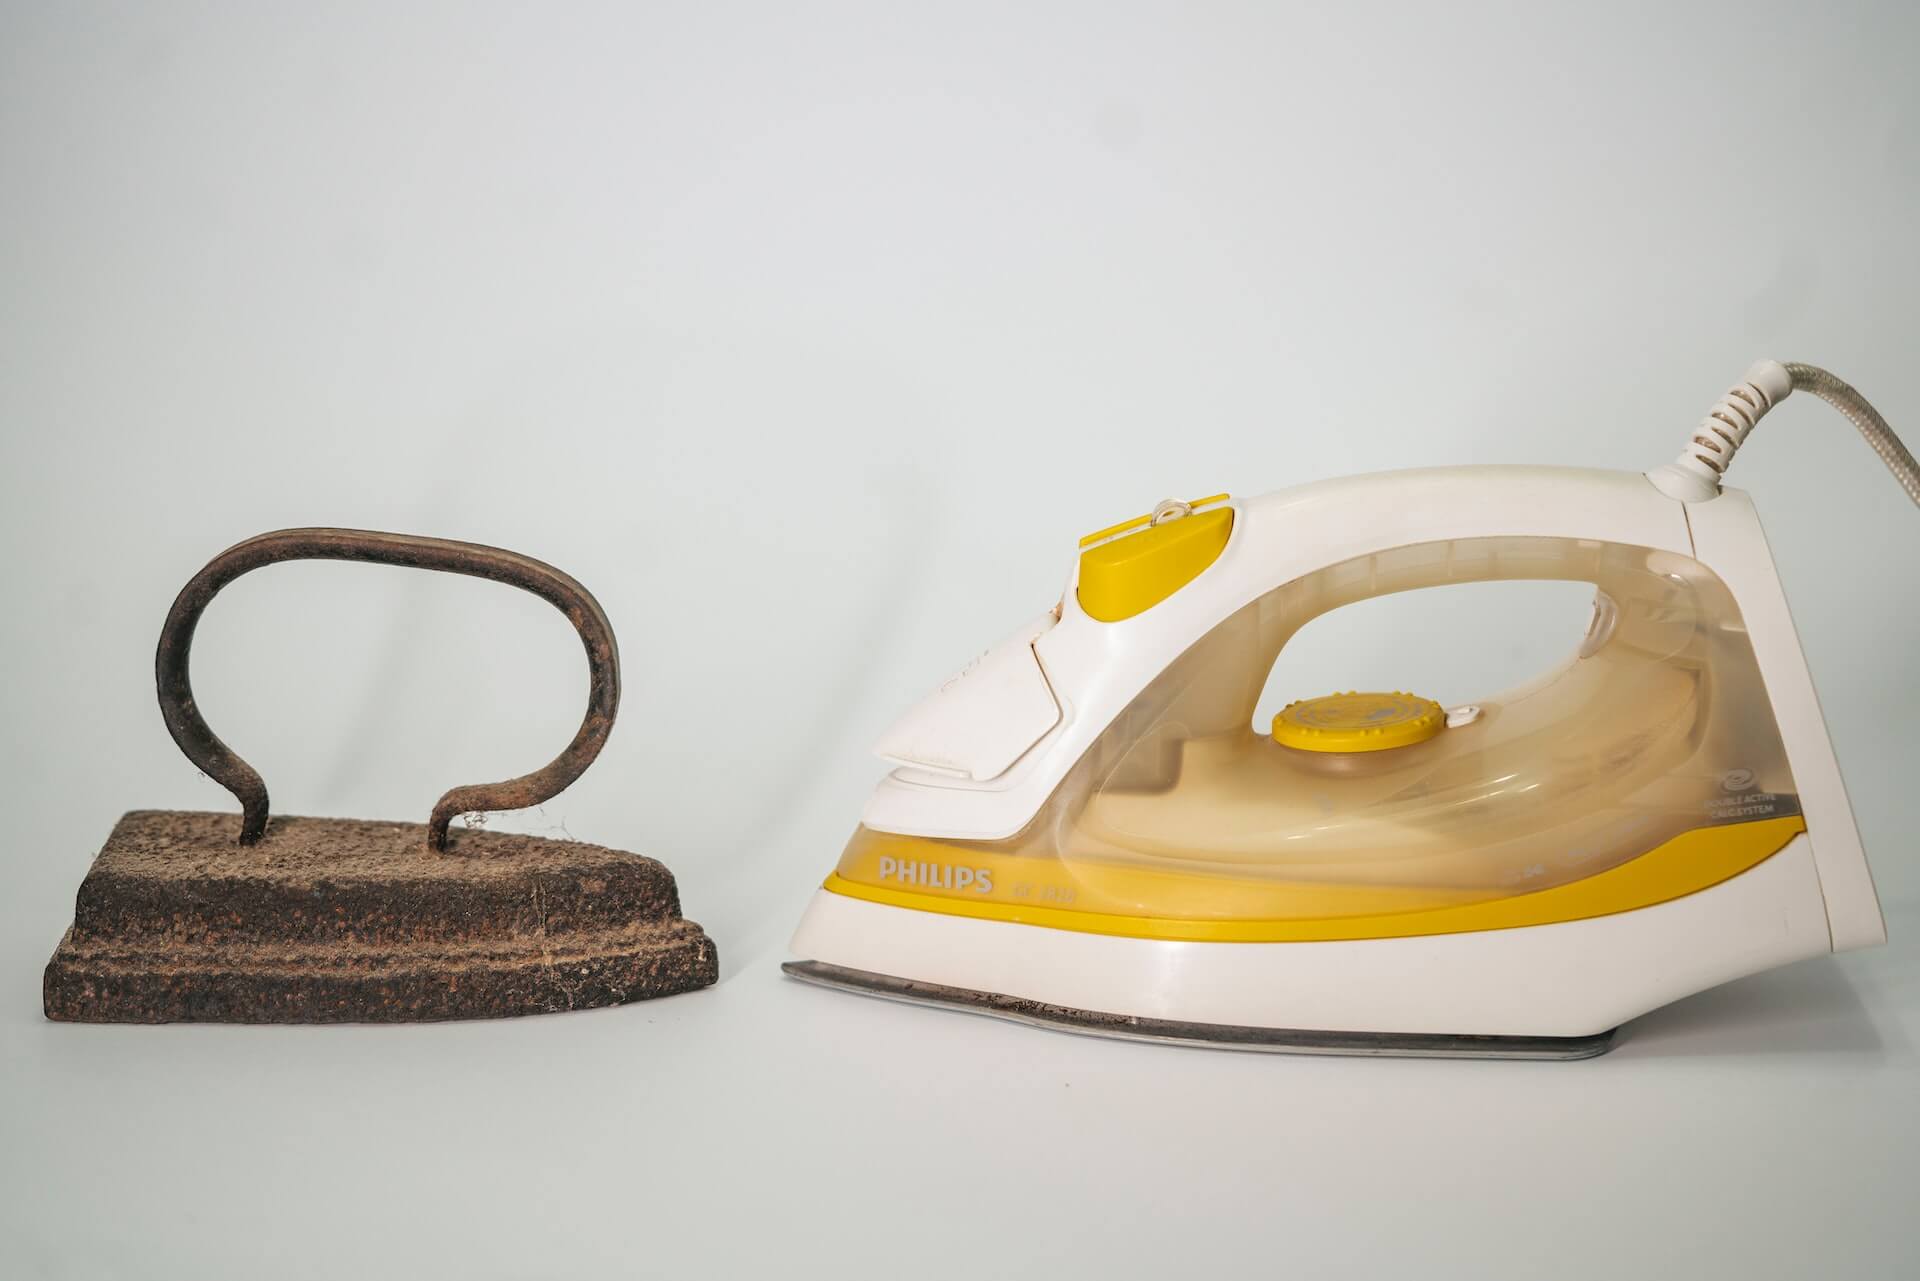 Guide for Steam Iron